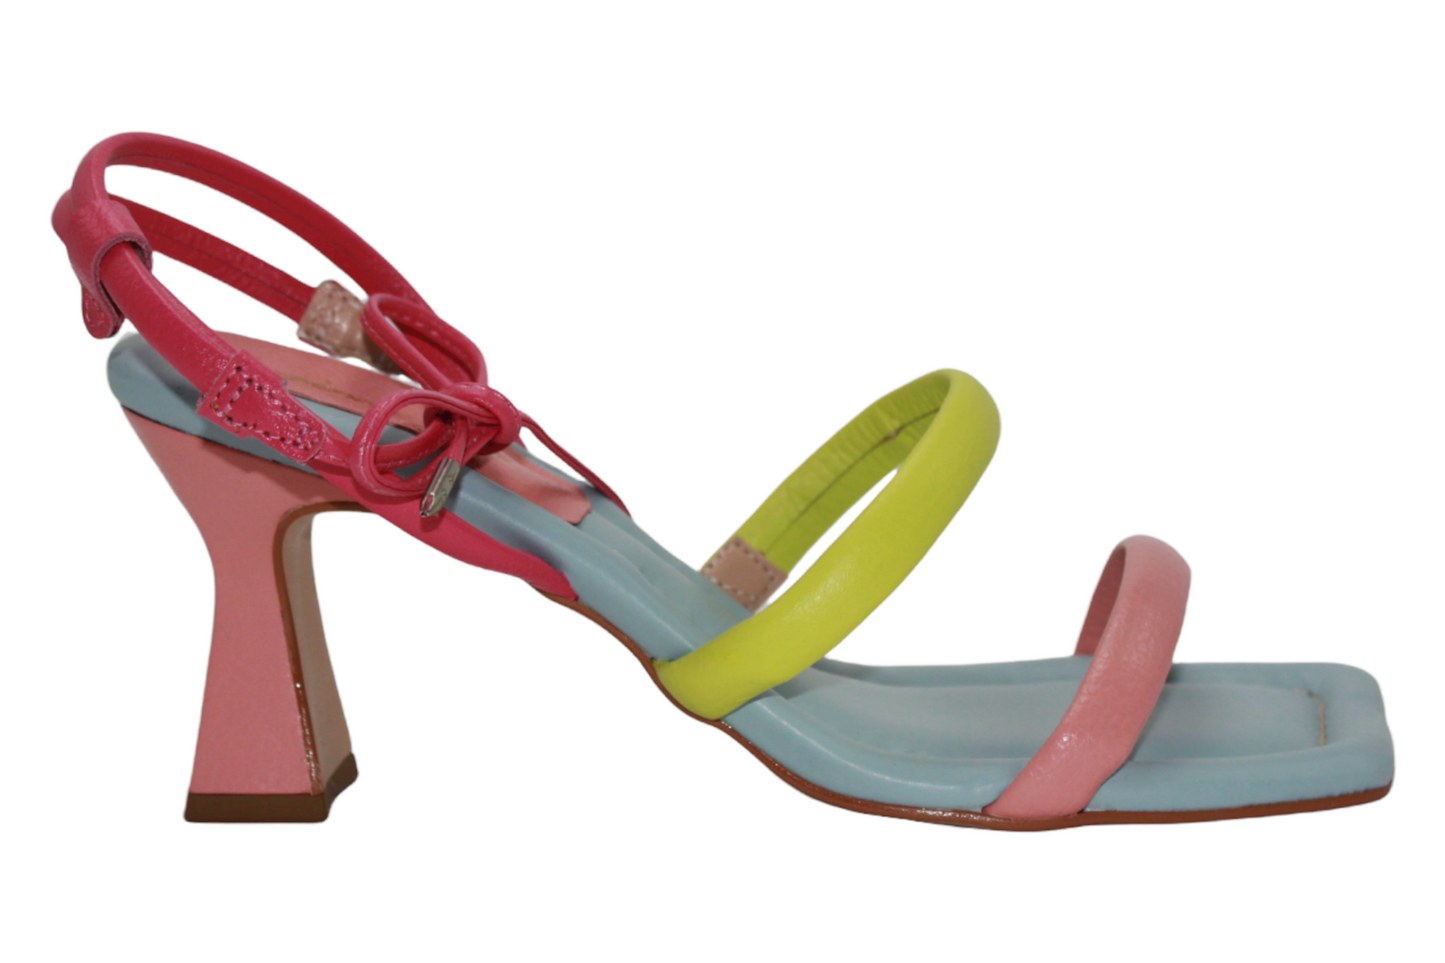 Multicolored Neon Heeled Sandals